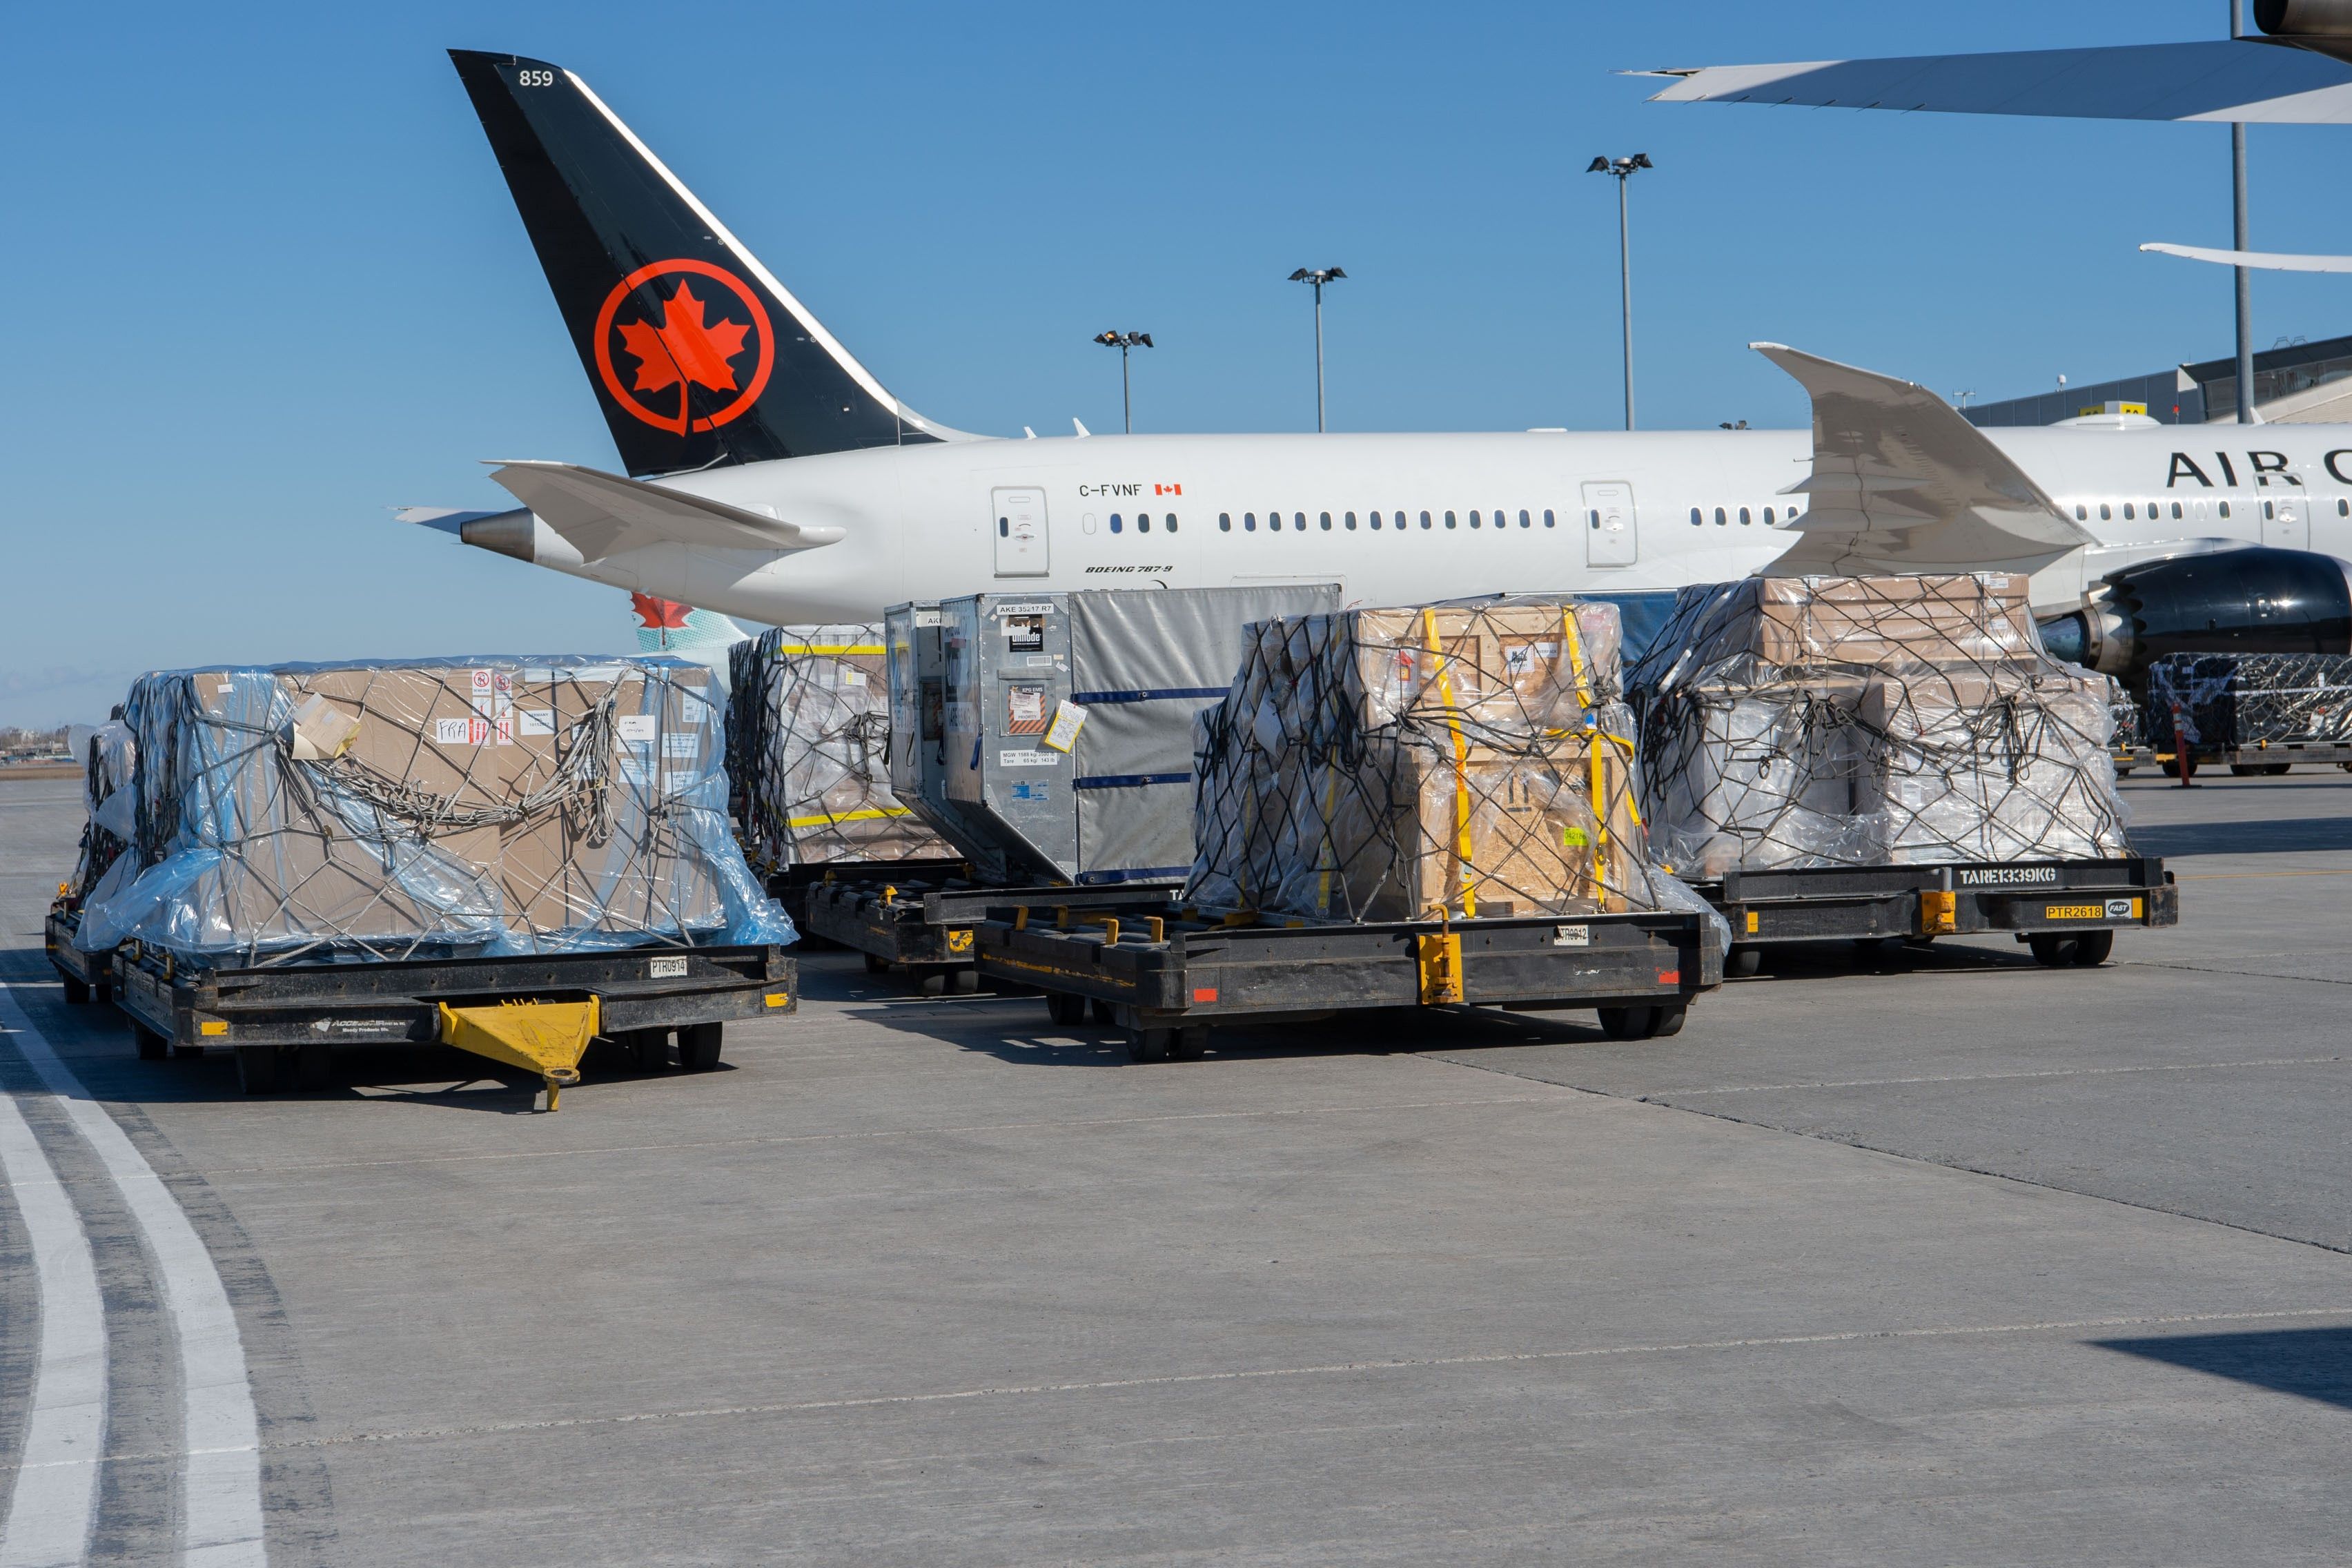 Air Cargo sitting on an airport apron waiting to be loaded onto an Air Canada Boeng 787-9.